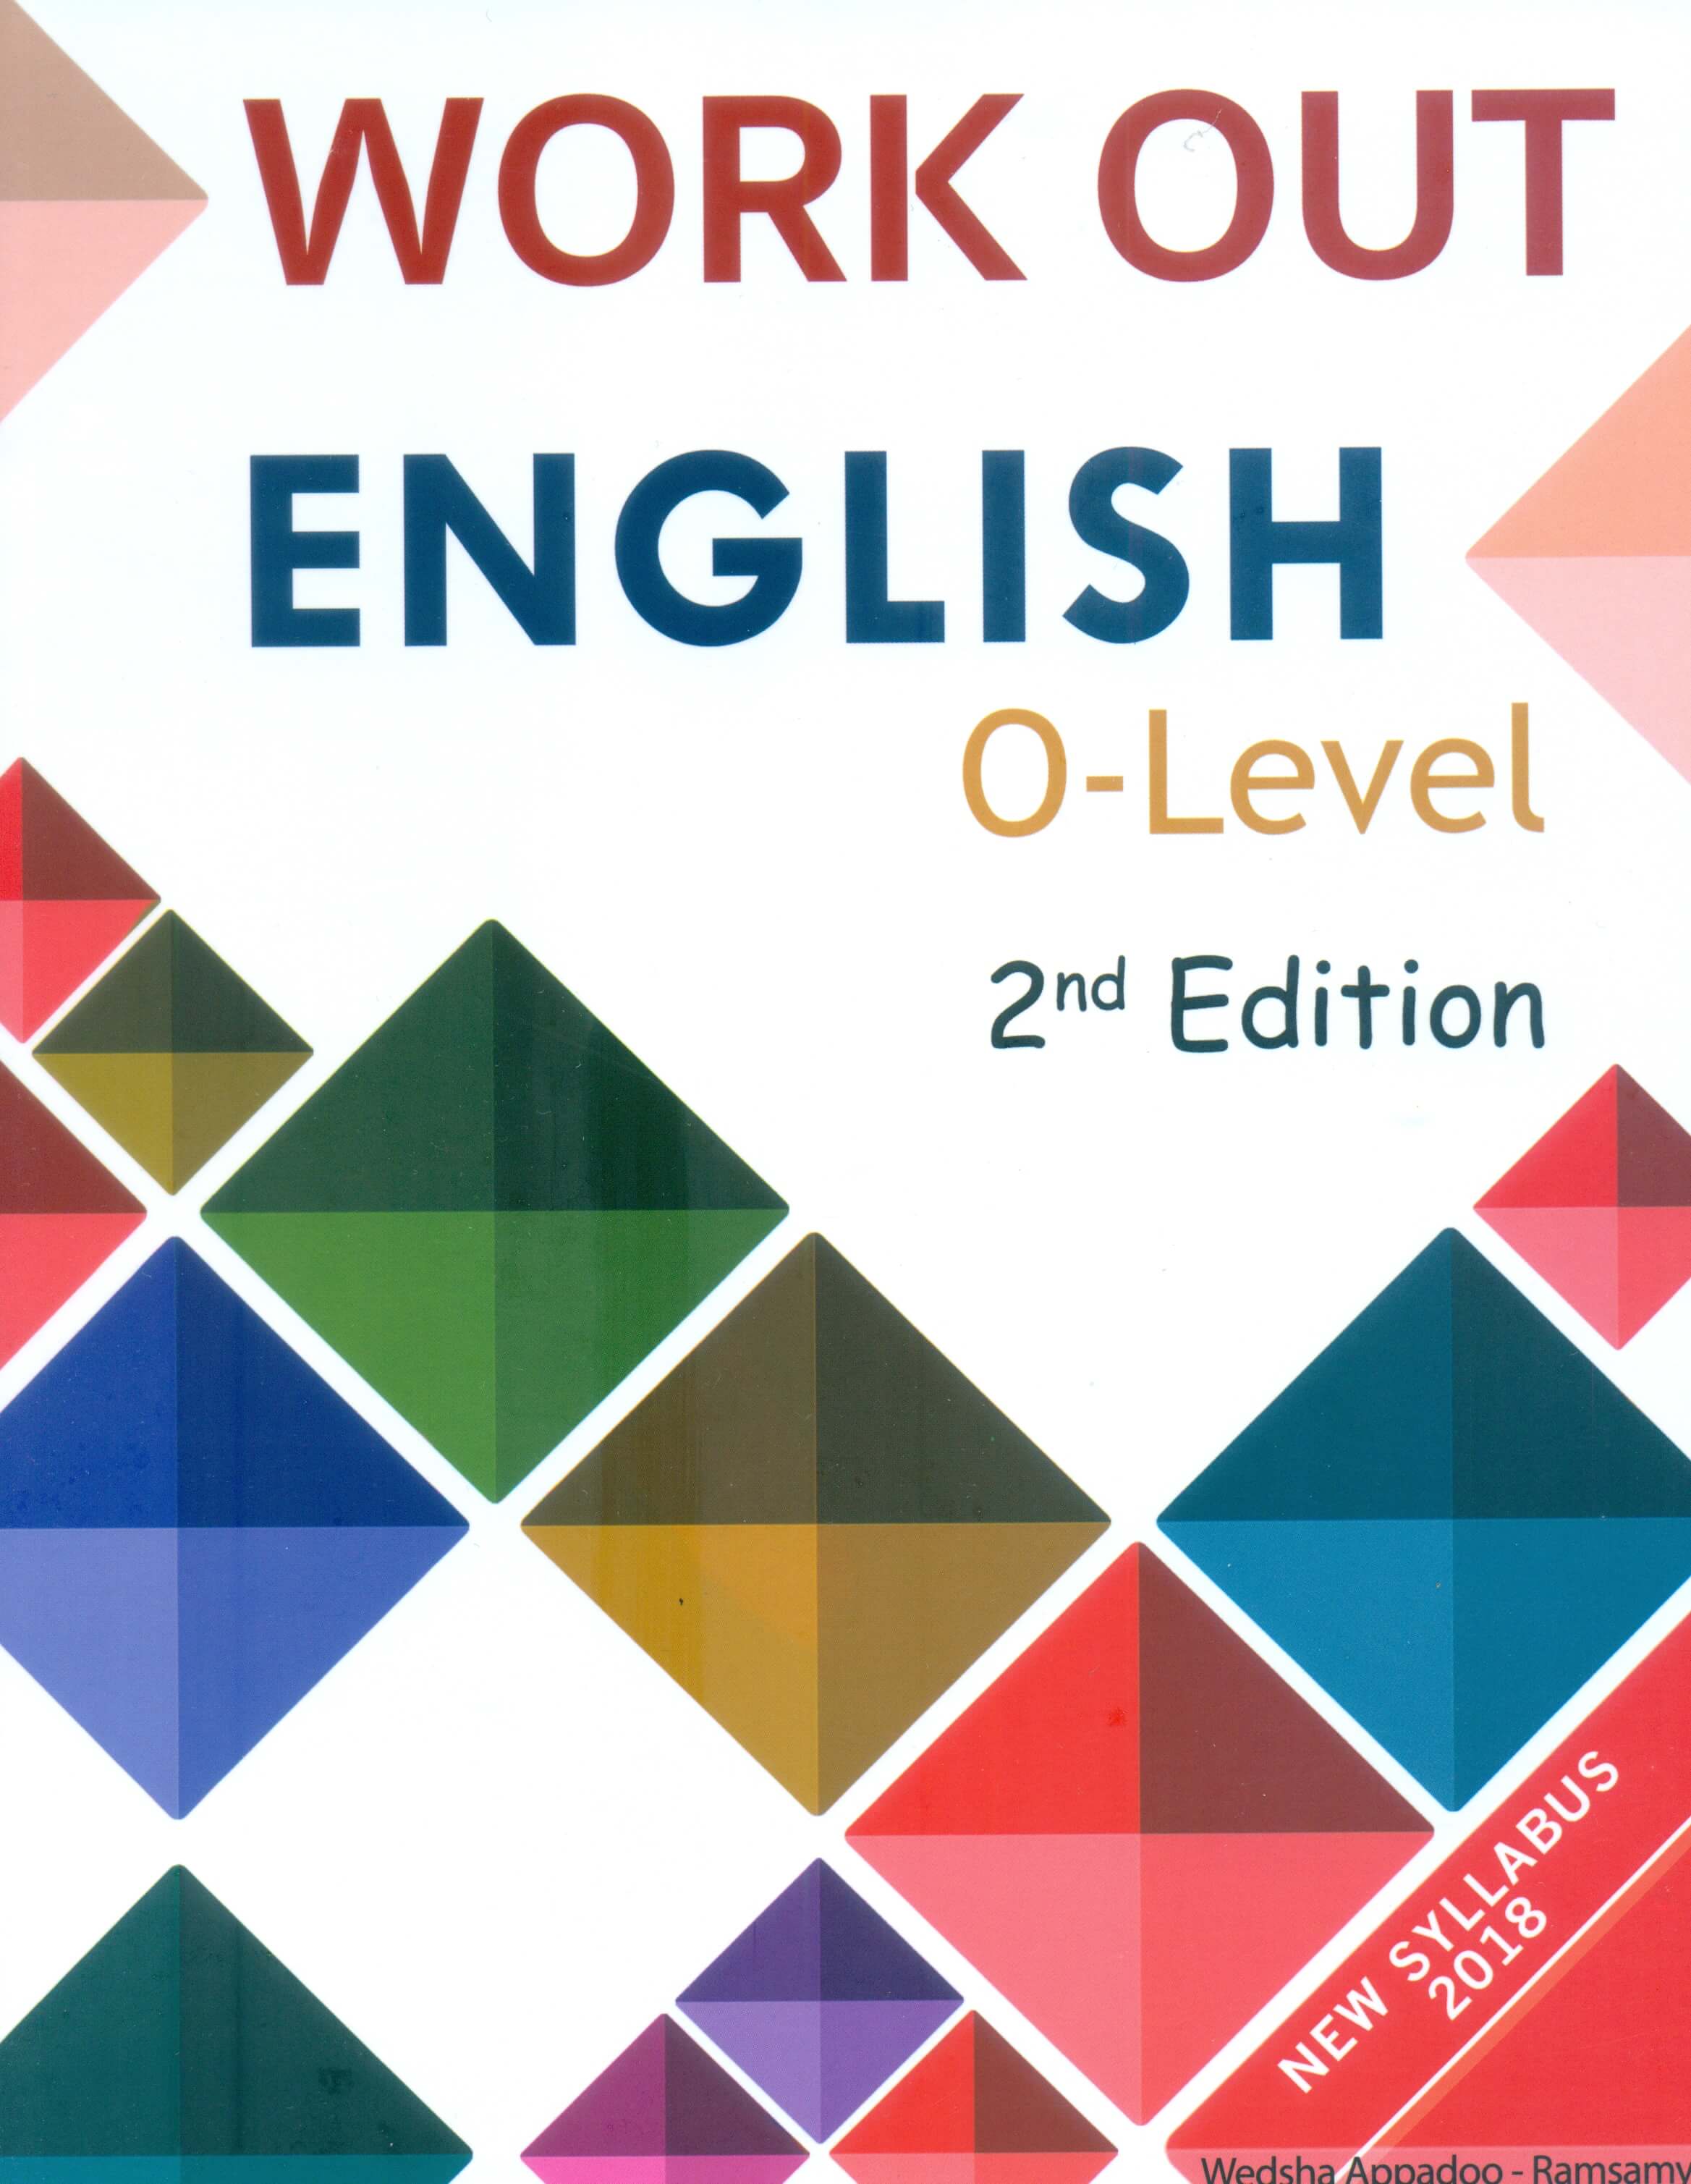 ELP - WORK OUT ENGLISH O LEVEL 2ND EDITION